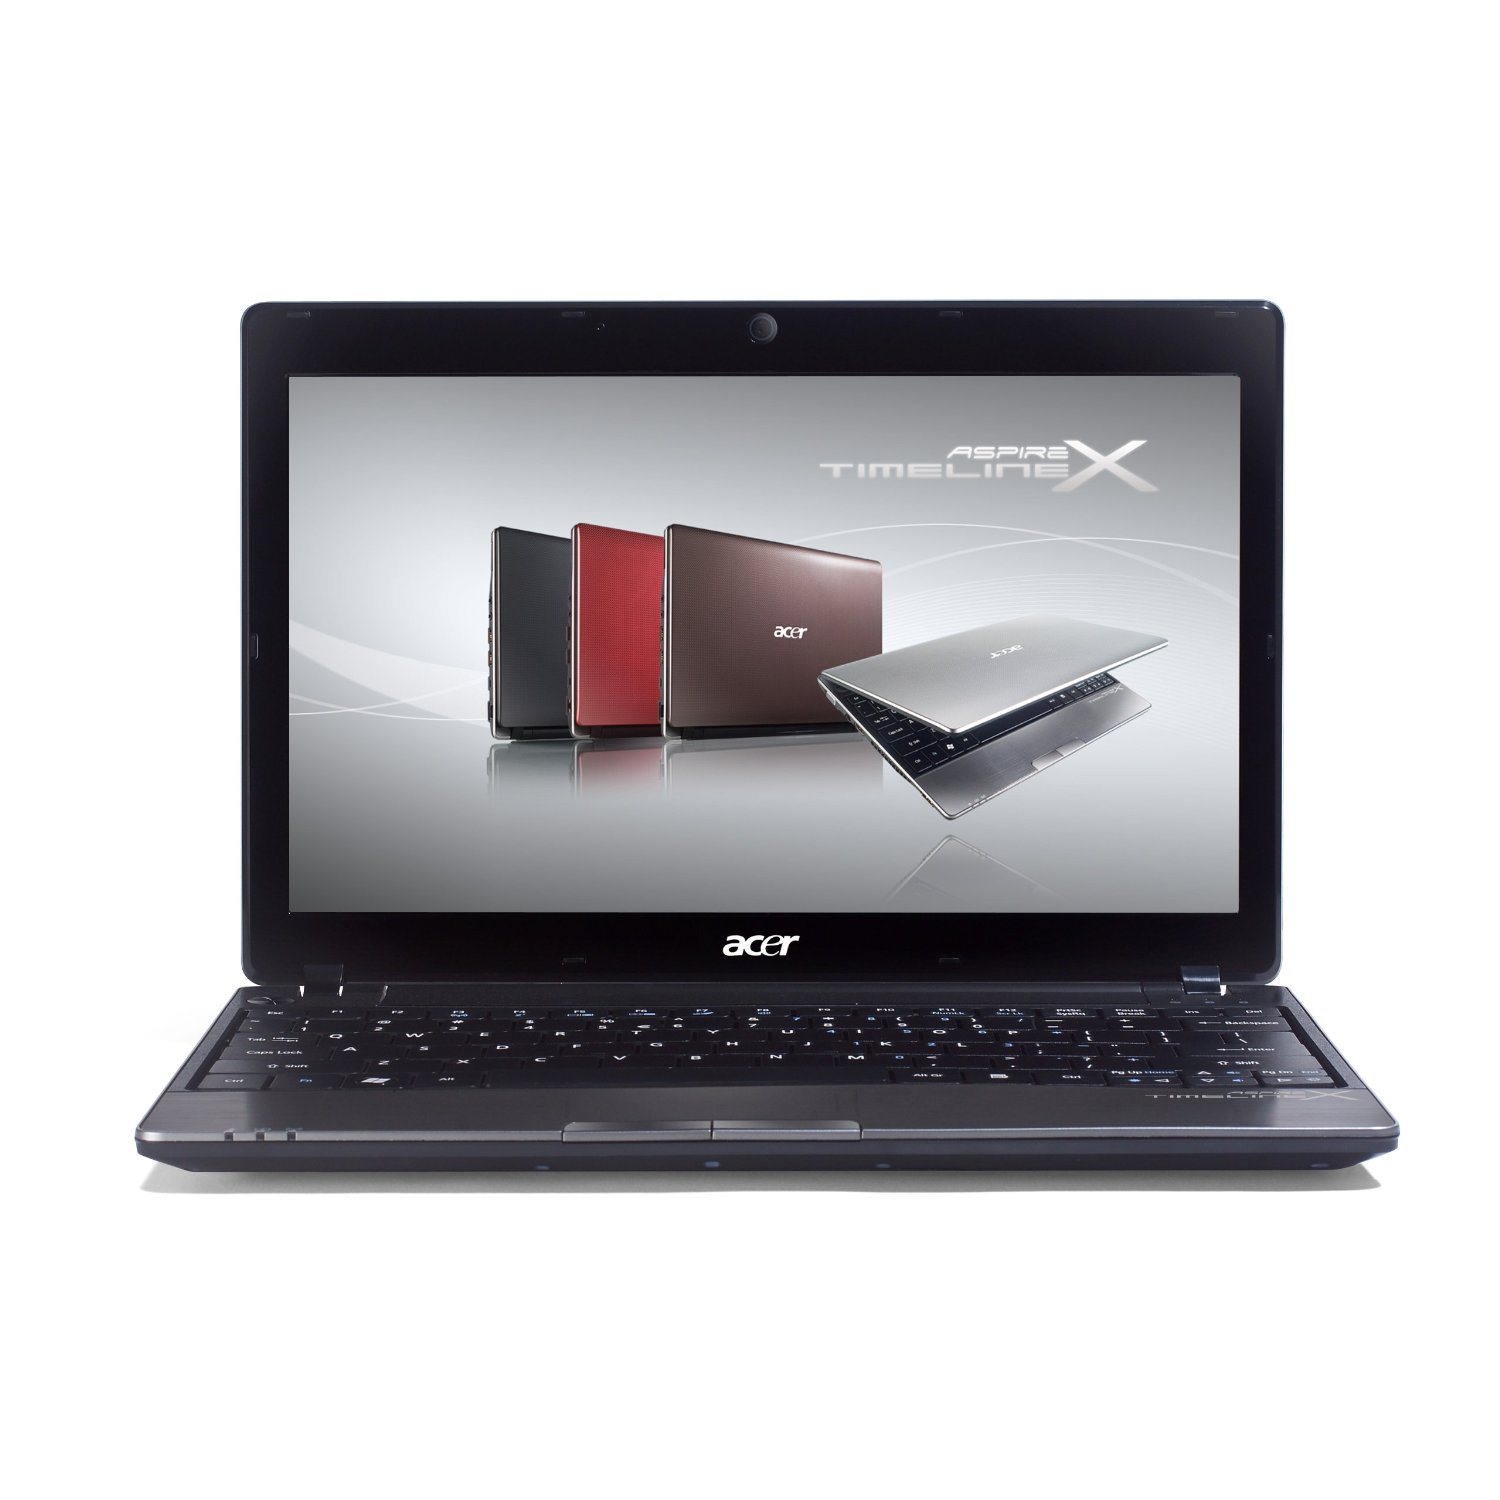 http://thetechjournal.com/wp-content/uploads/images/1111/1320424023-acer-aspire-timelinex-as1830t6651-116inch-laptop-1.jpg